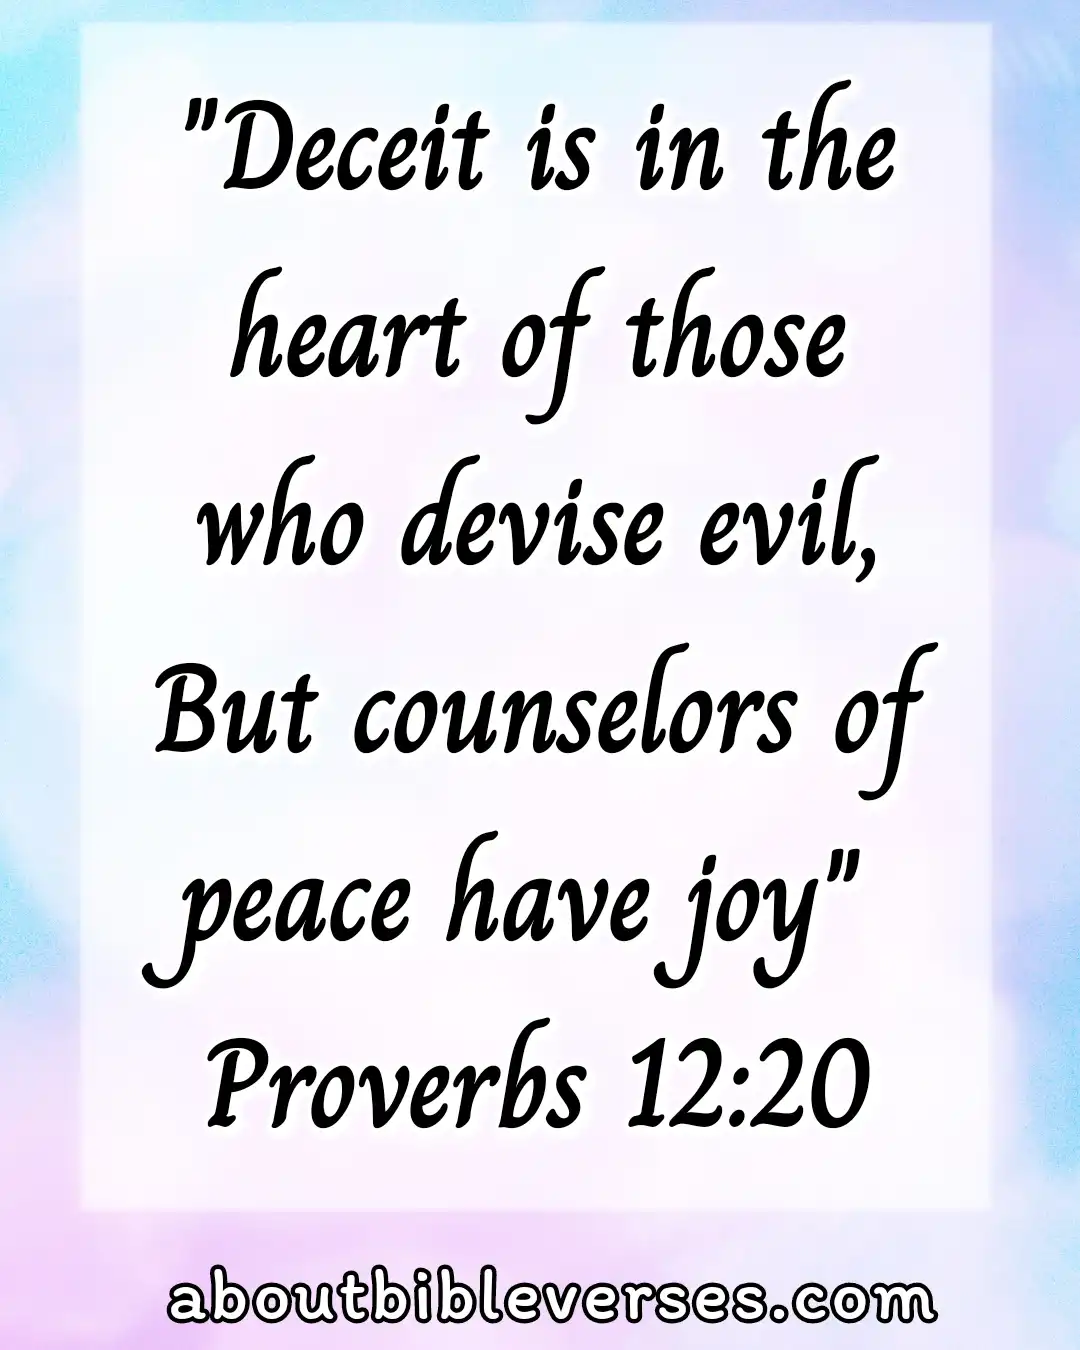 bible verses about peace (Proverbs 12:20)